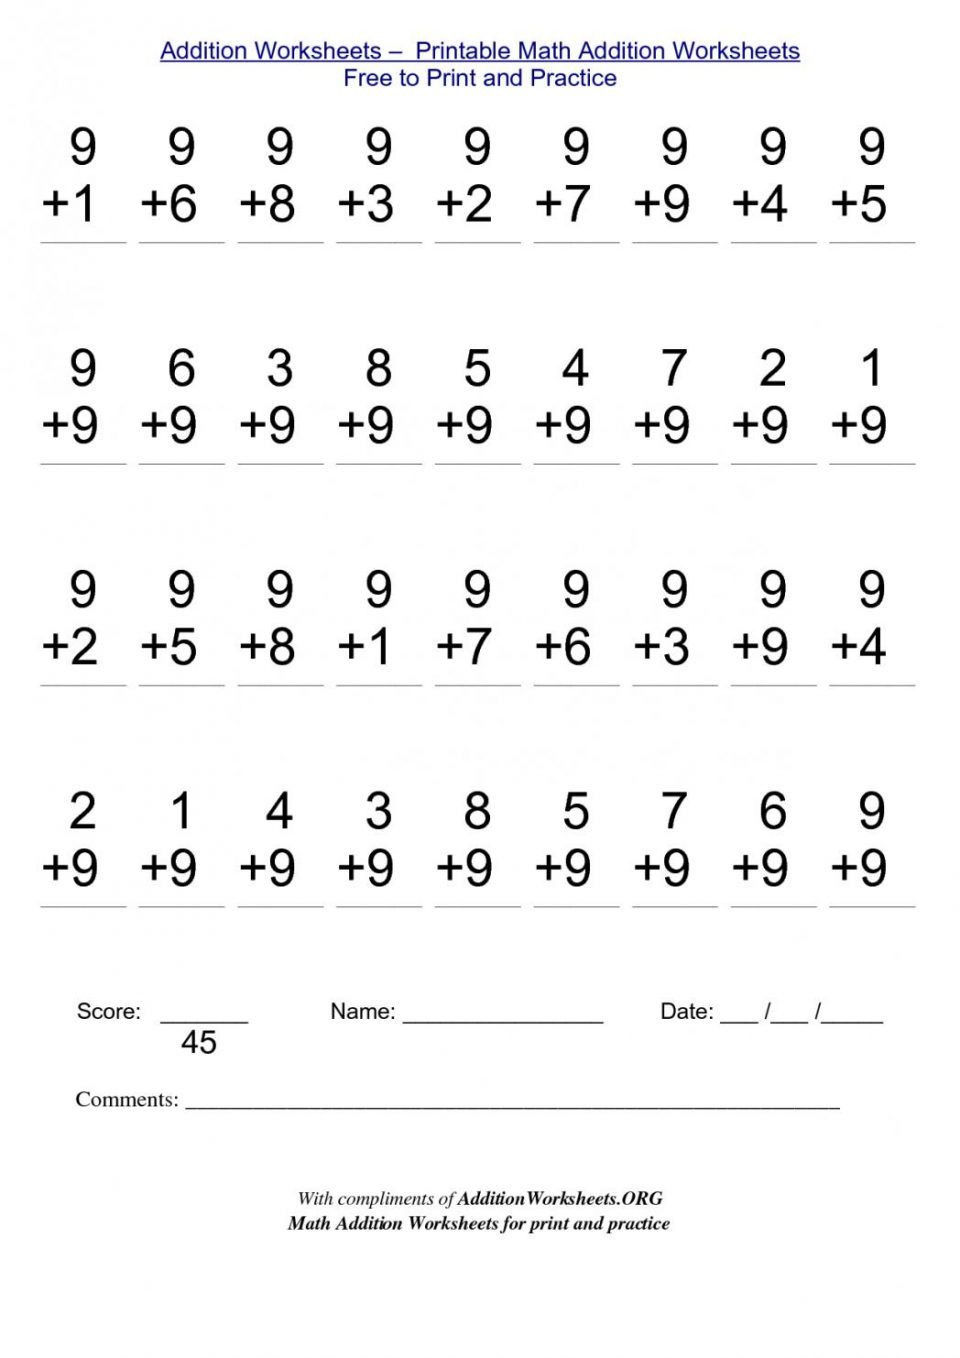 touch-math-free-worksheets-samples